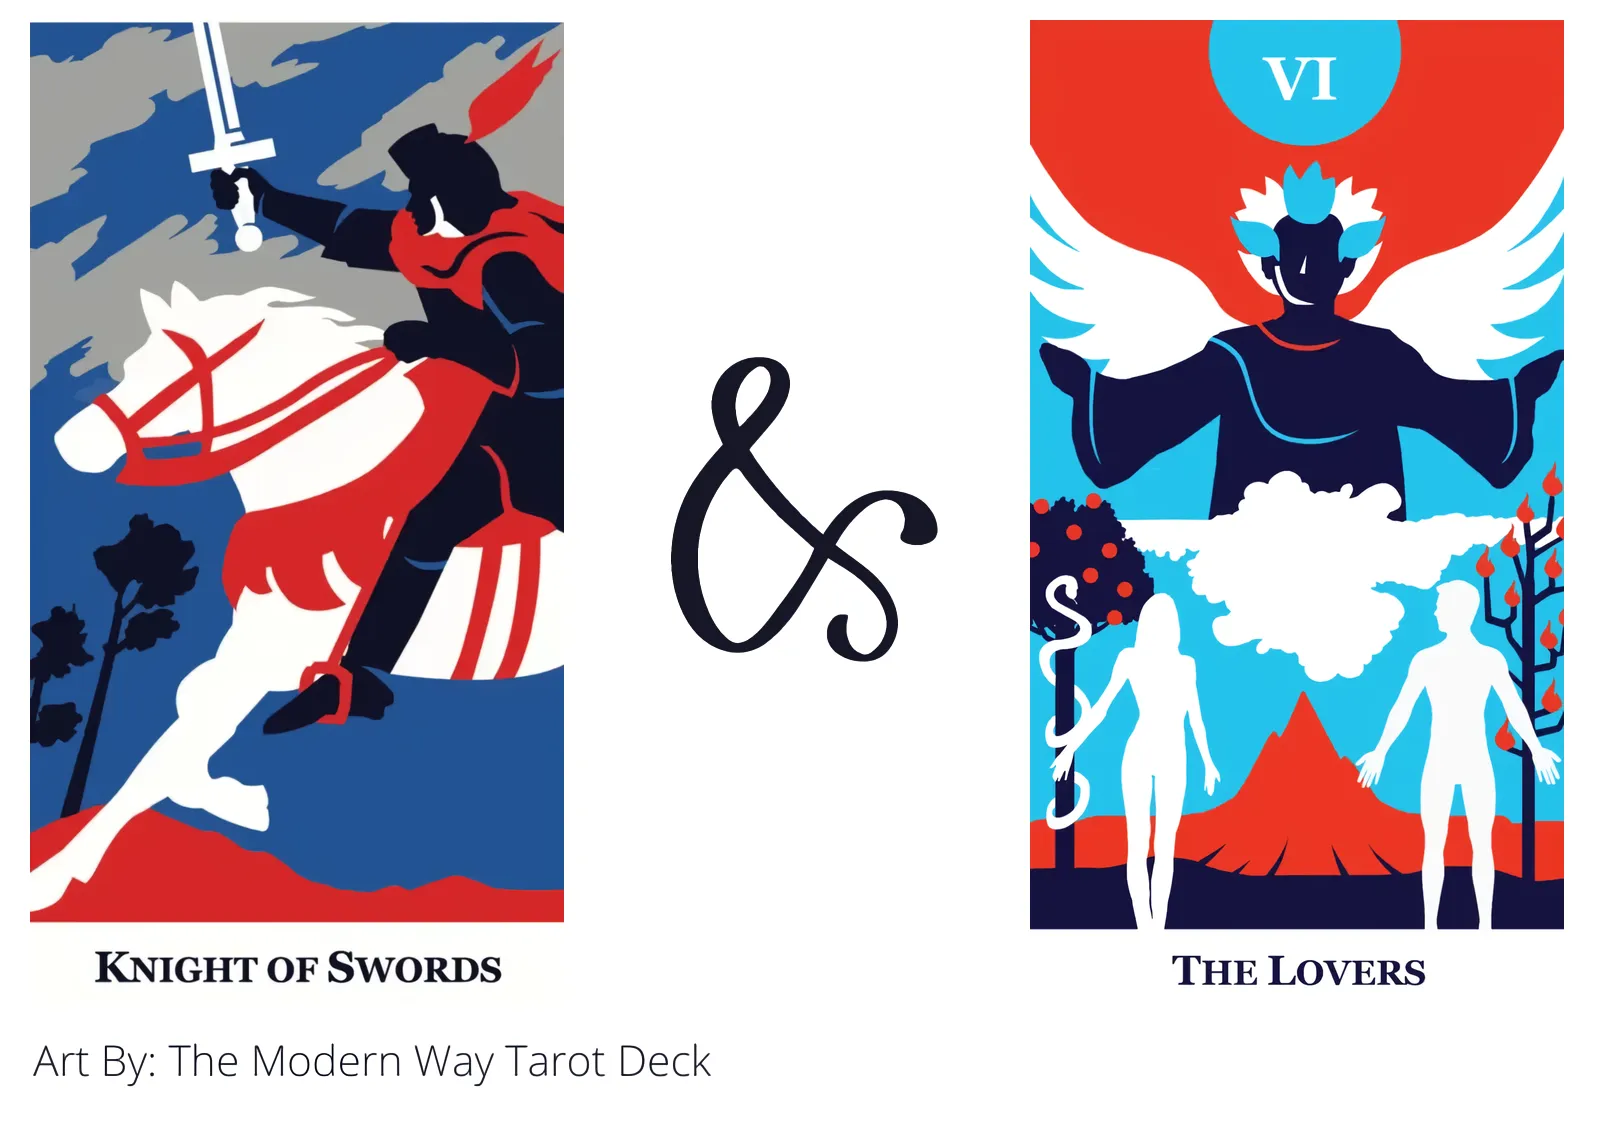 knight of swords and the lovers tarot cards together